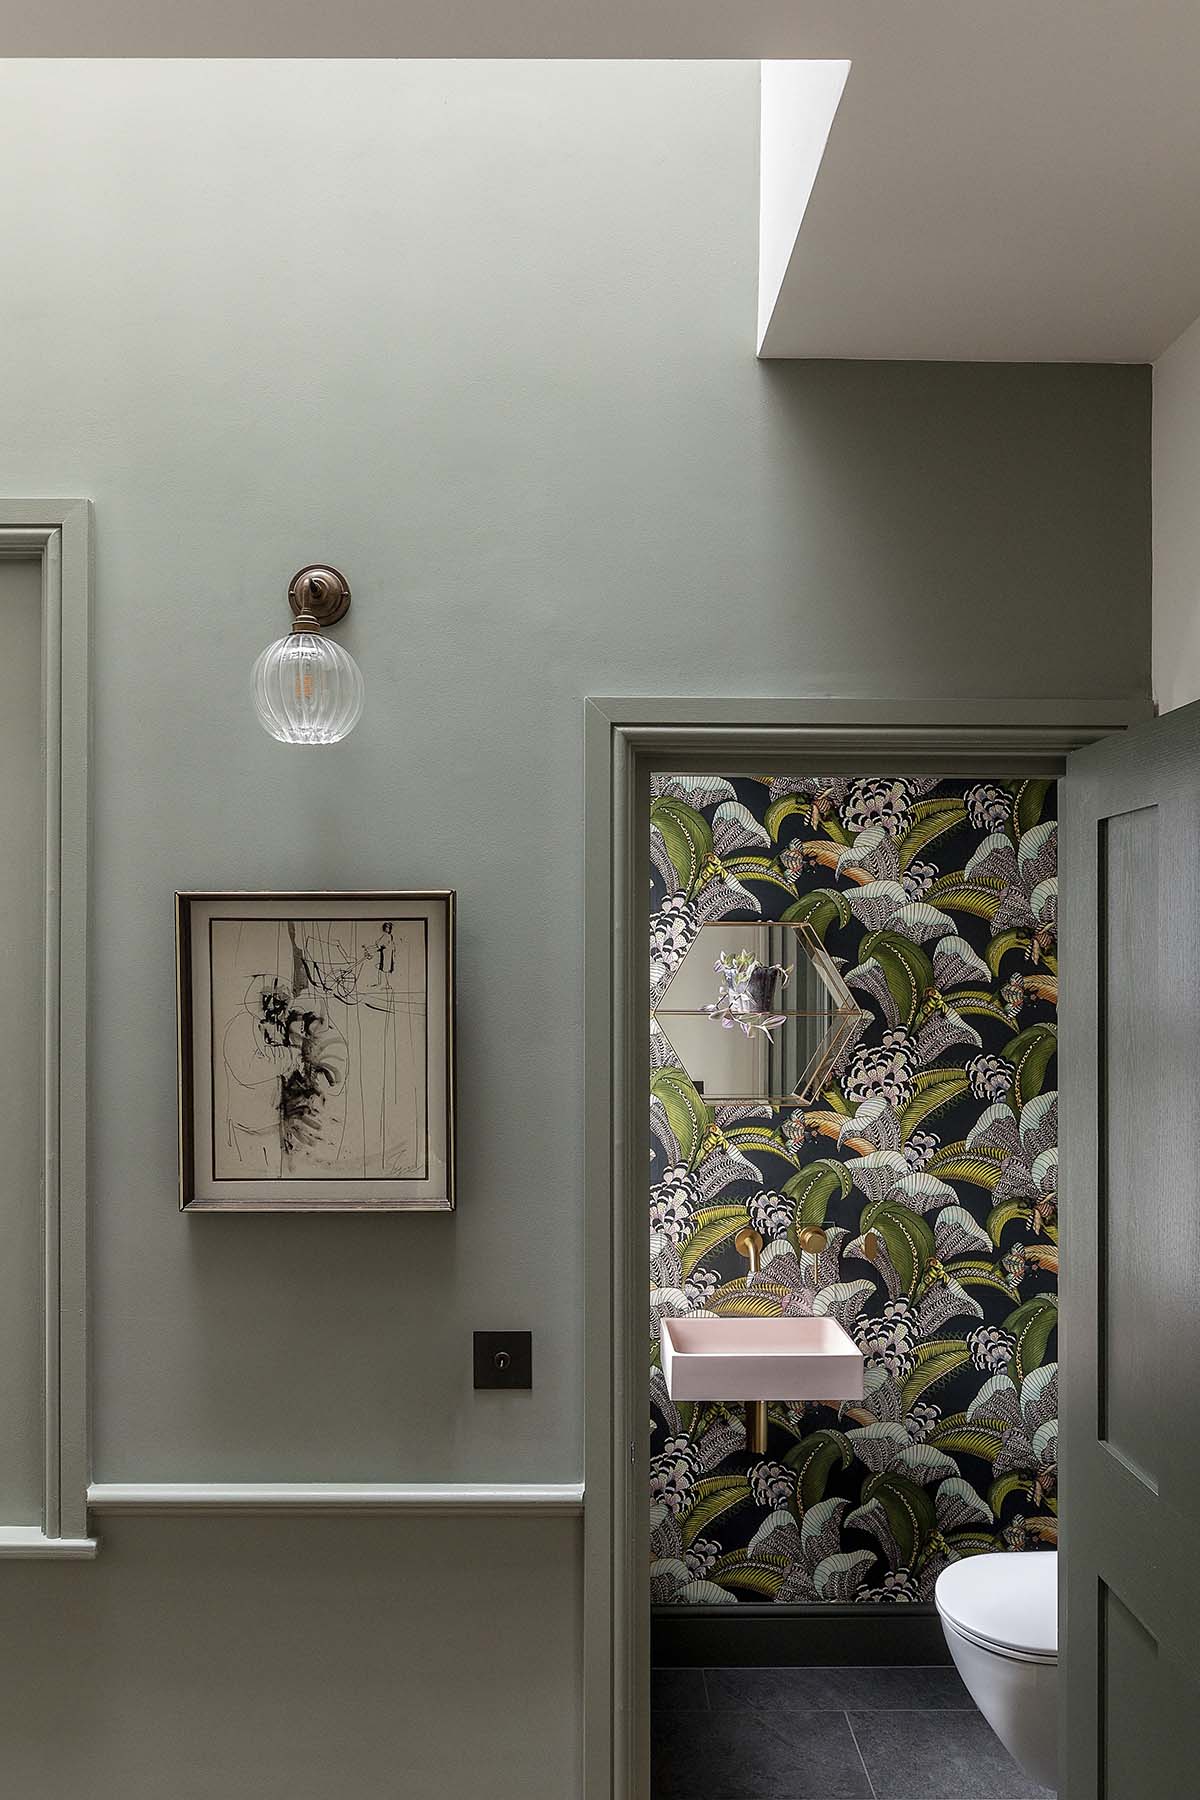 Emil Eve renovation on Talbot Road in London - pictured is the hallway